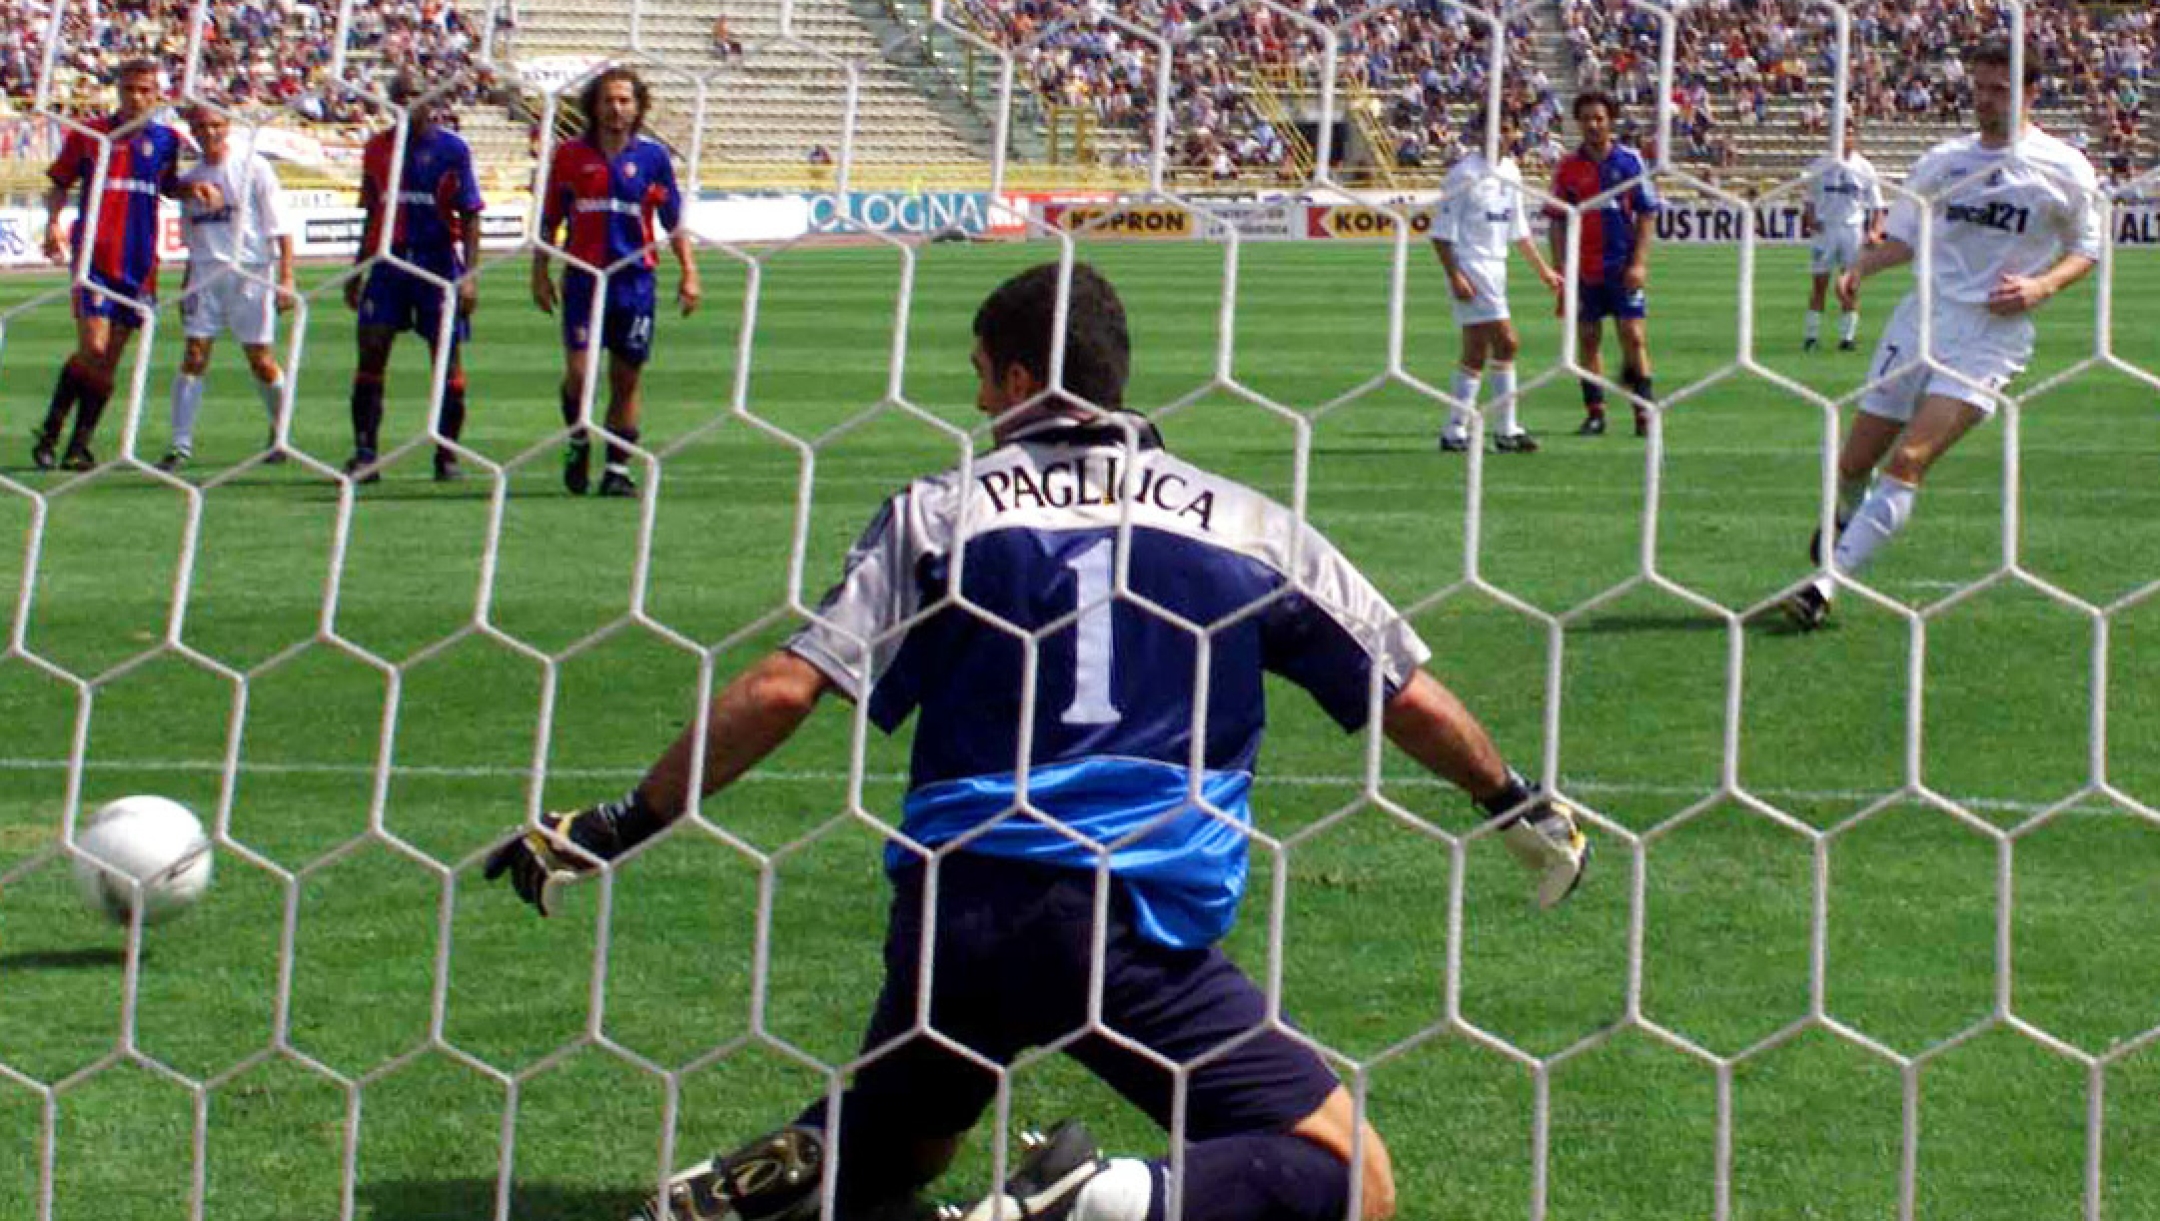 Lecce's Davor Vugrinec of Croatia, right, kicks to score against Bologna's goalkeeper Gianluca Pagliuca during the Italian first league serie A Bologna vs Lecce soccer match, Bologna, northern Italy, Sunday, June 10, 2001. The match ended 2 - 2. (AP Photo/ Renato Ferrini)